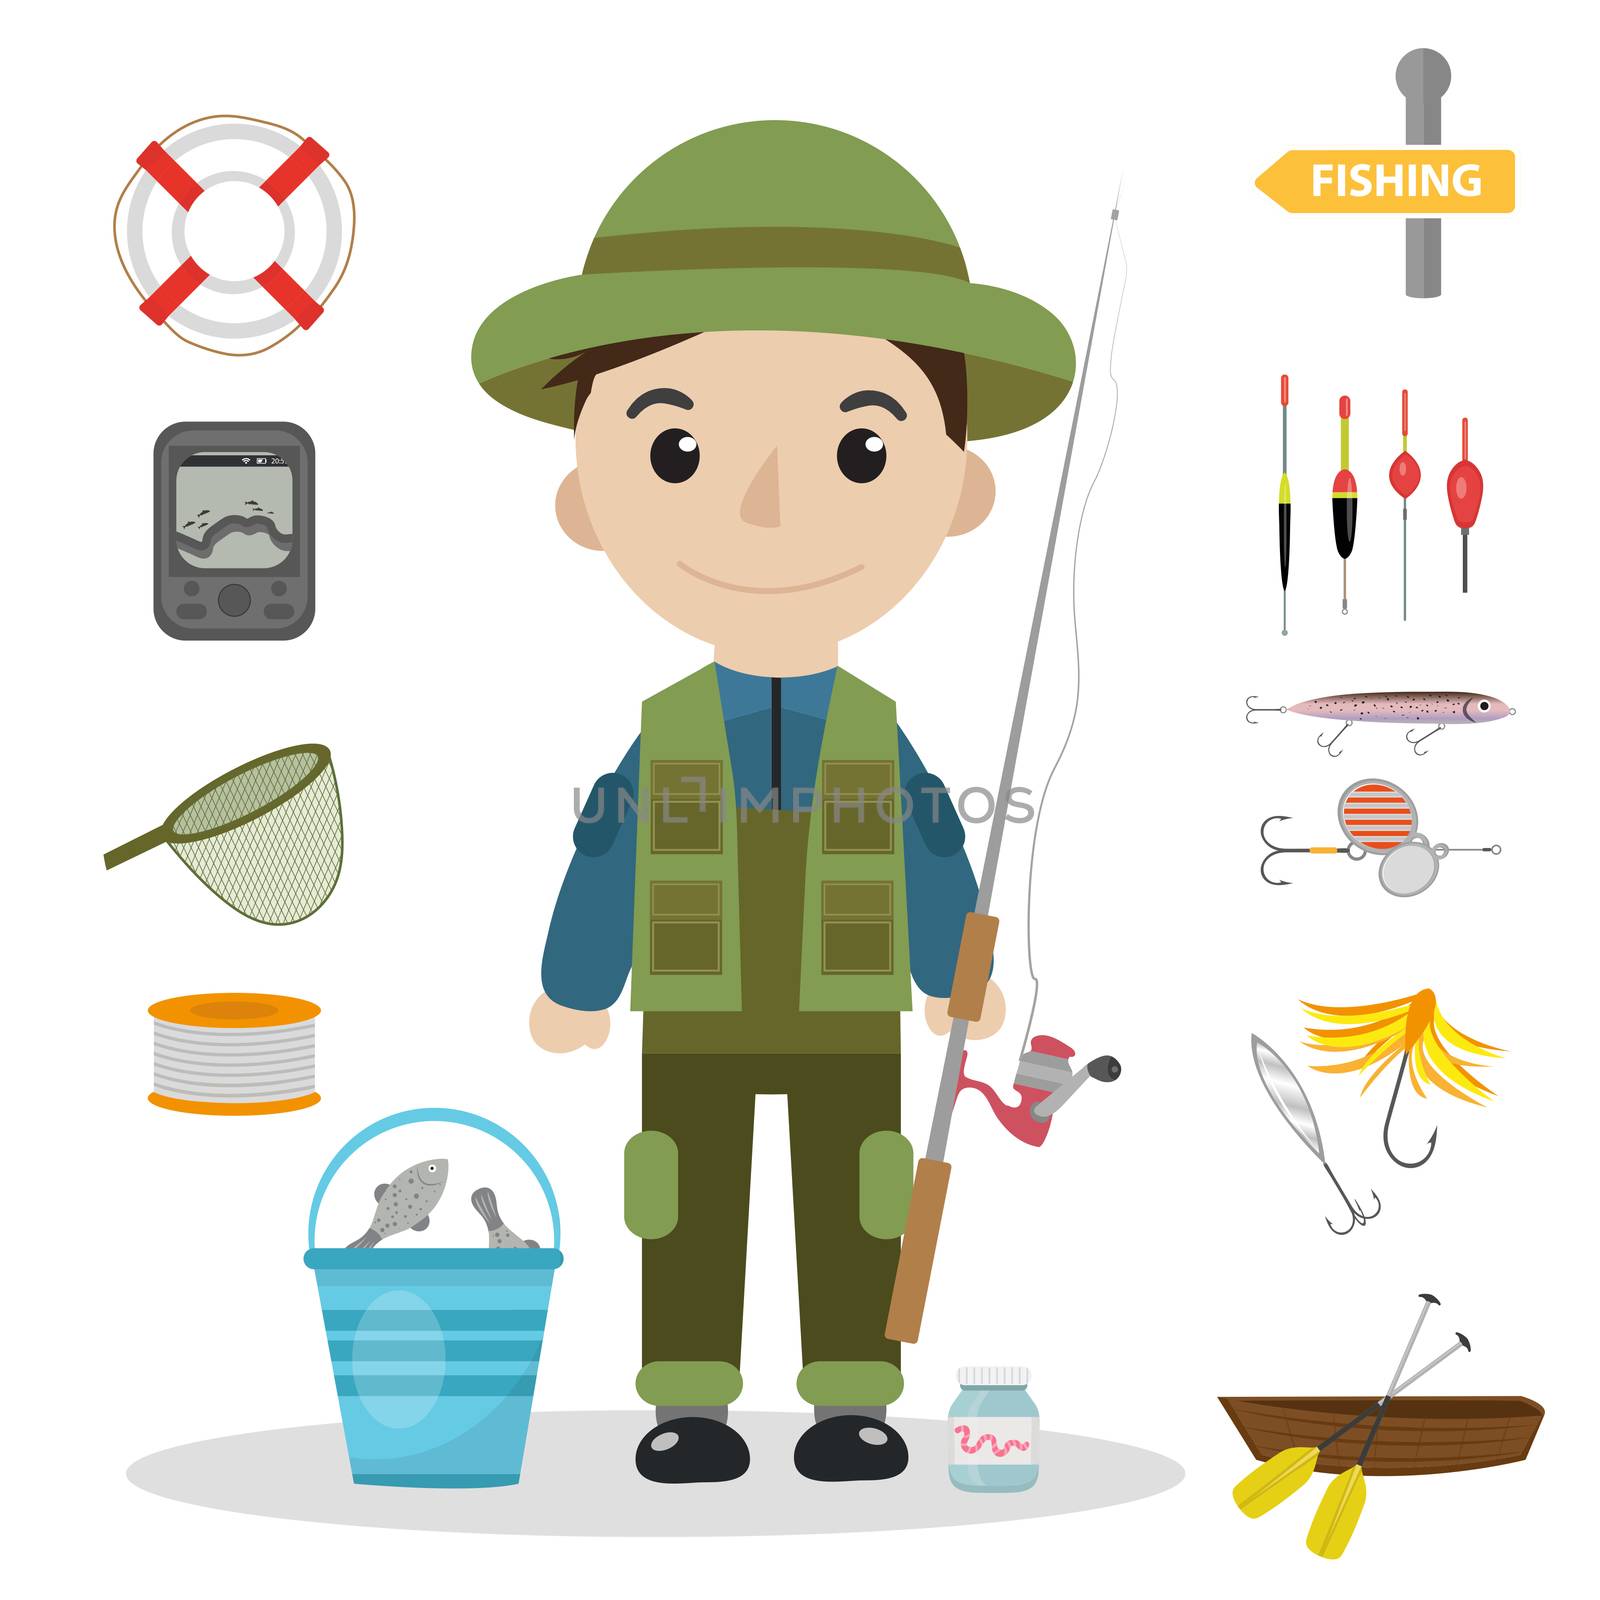 Fishing icon set, flat, cartoon style. Fishery collection objects, design elements, isolated on white background. Fisherman s tools with a fishing rod, tackle, bait, boat. ilustration by lucia_fox